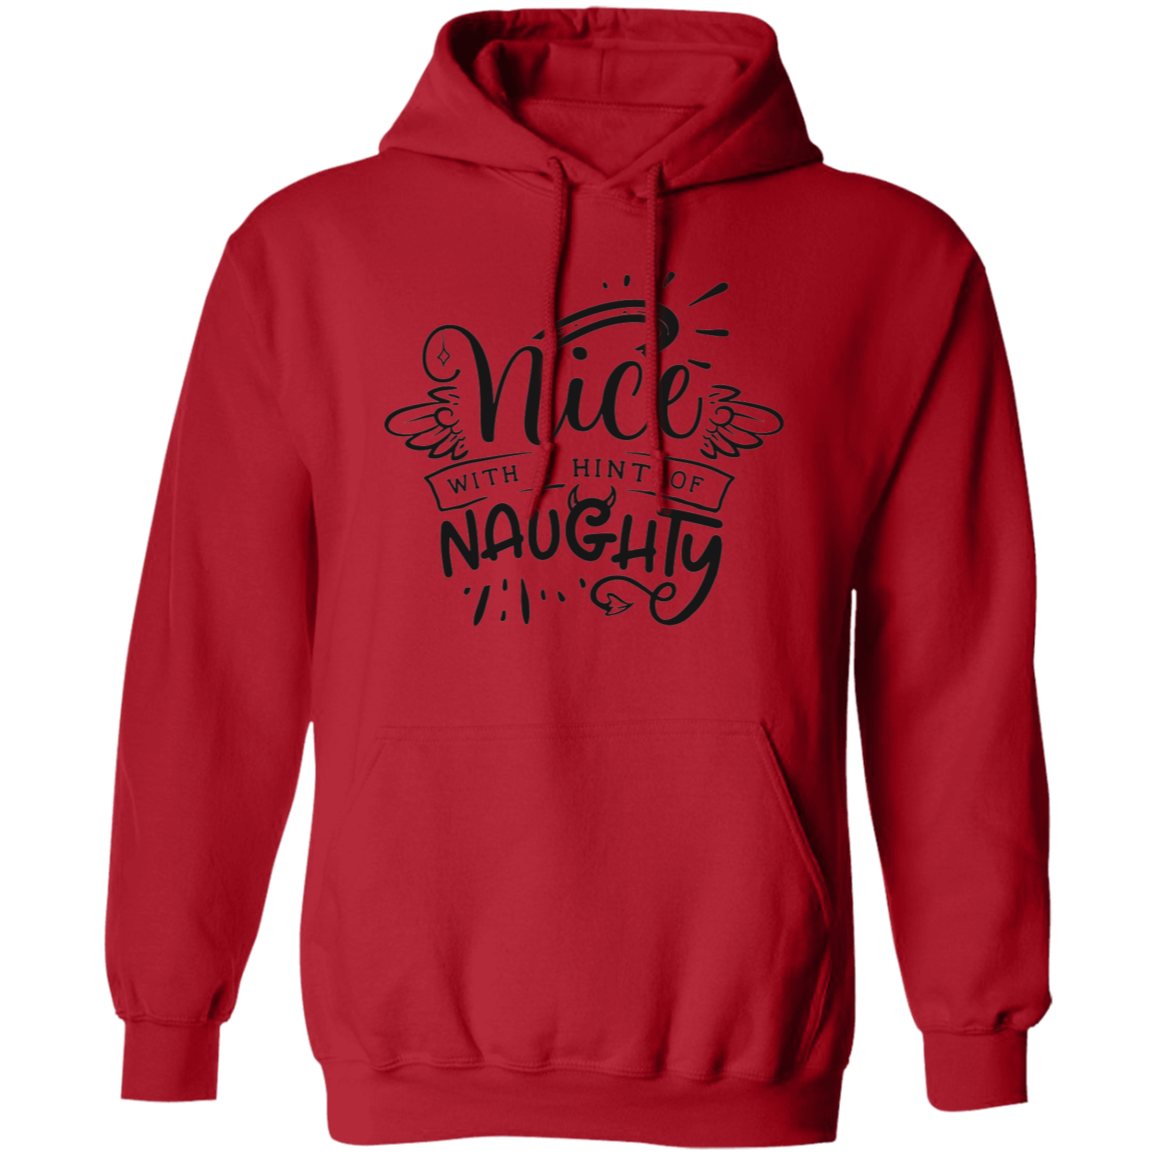 Nice With A Hint Of Naughty G185 Pullover Hoodie